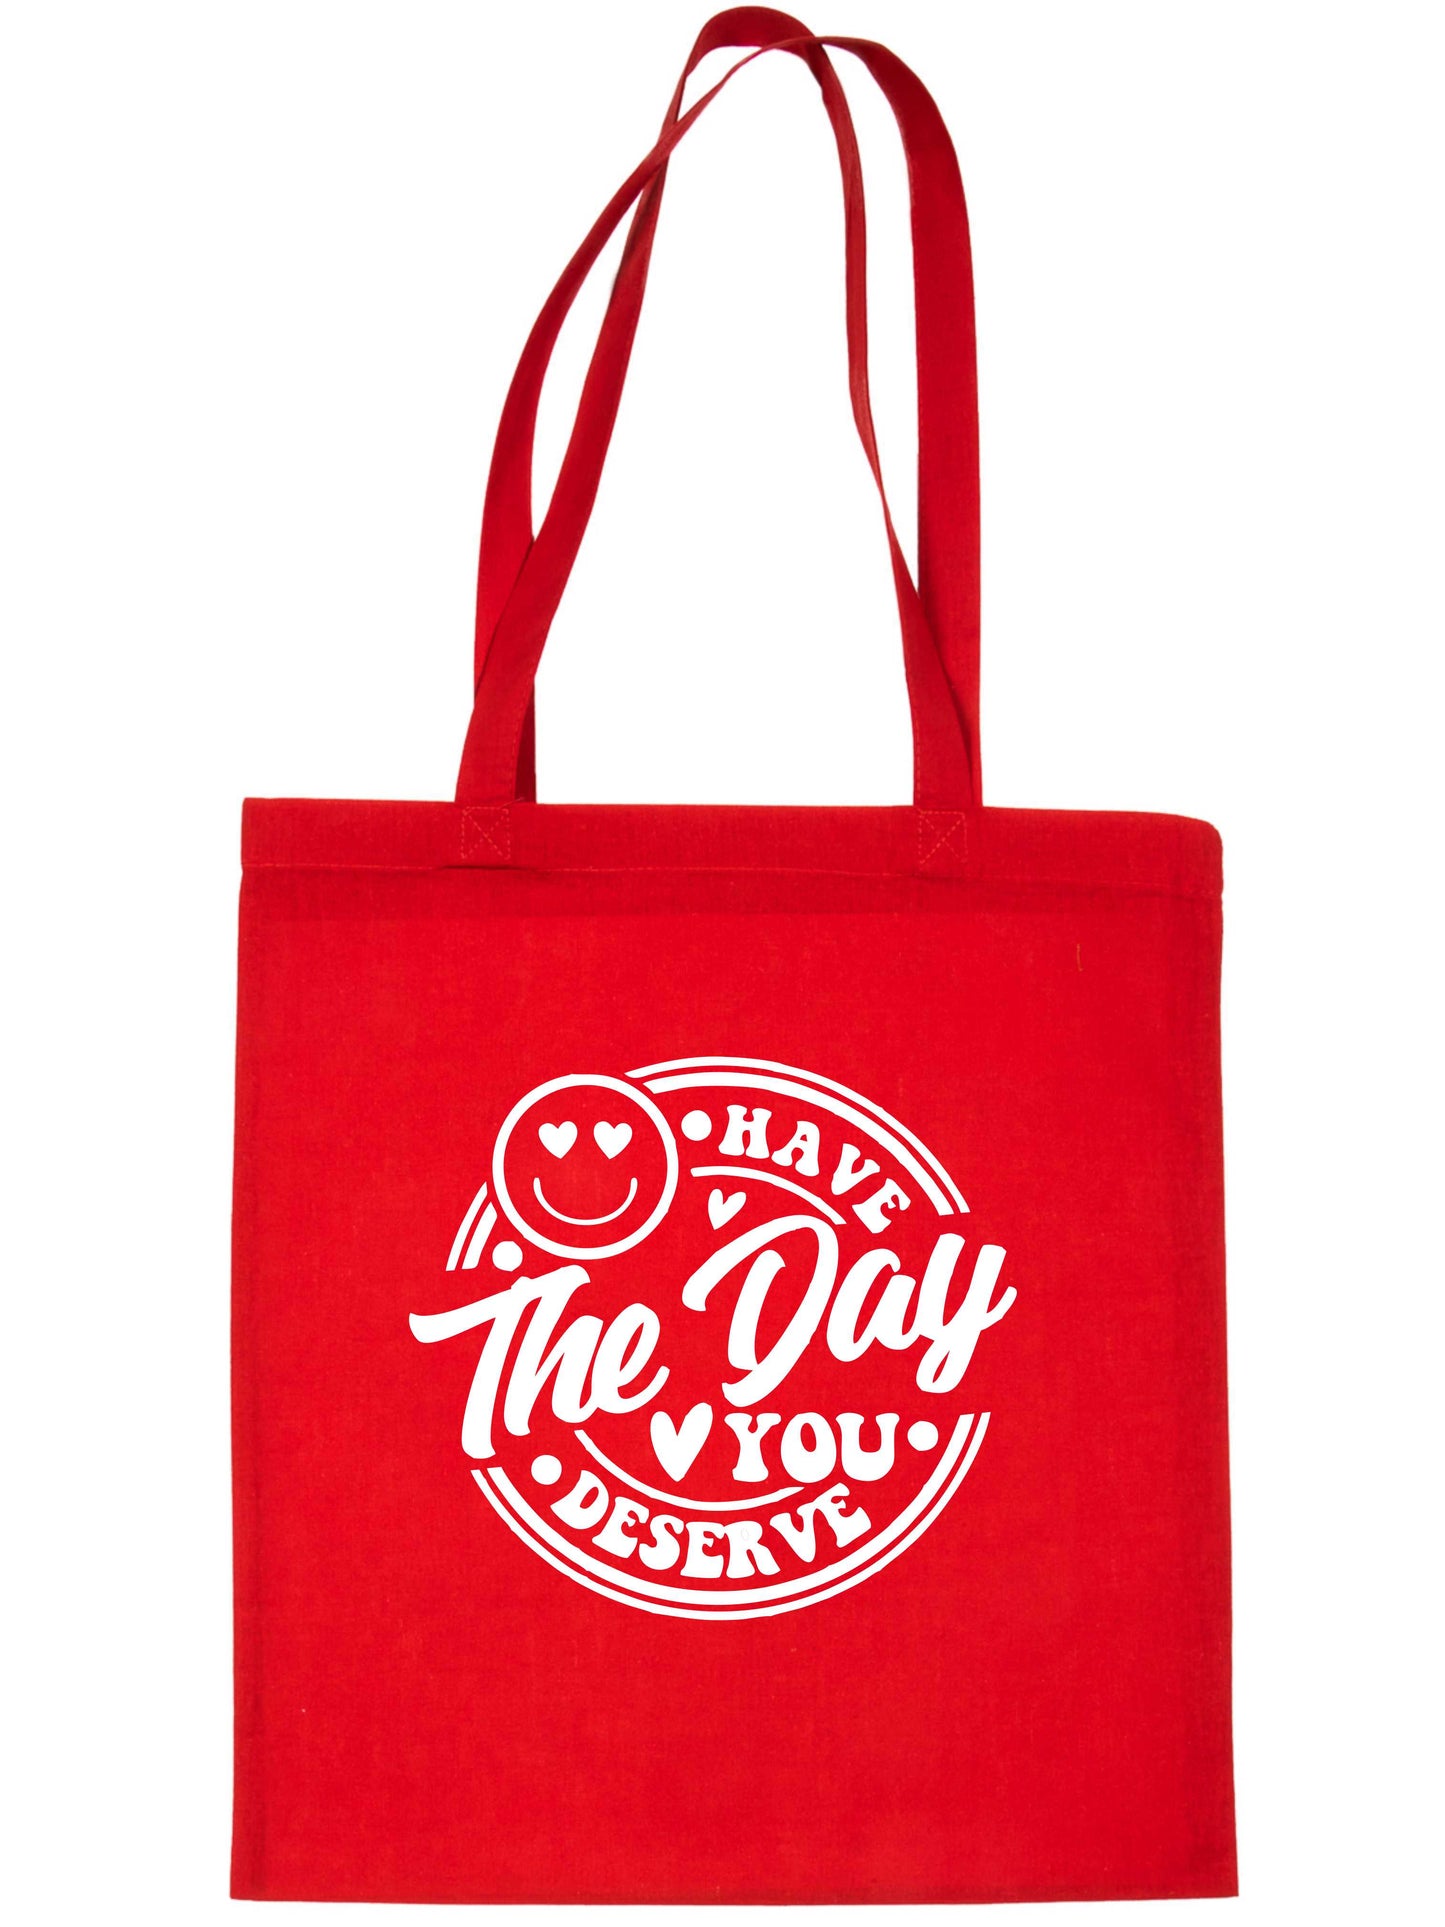 Have The Day You Deserve Tote Bag Mental Awareness Self Love Gift Resuable Shopping Bag